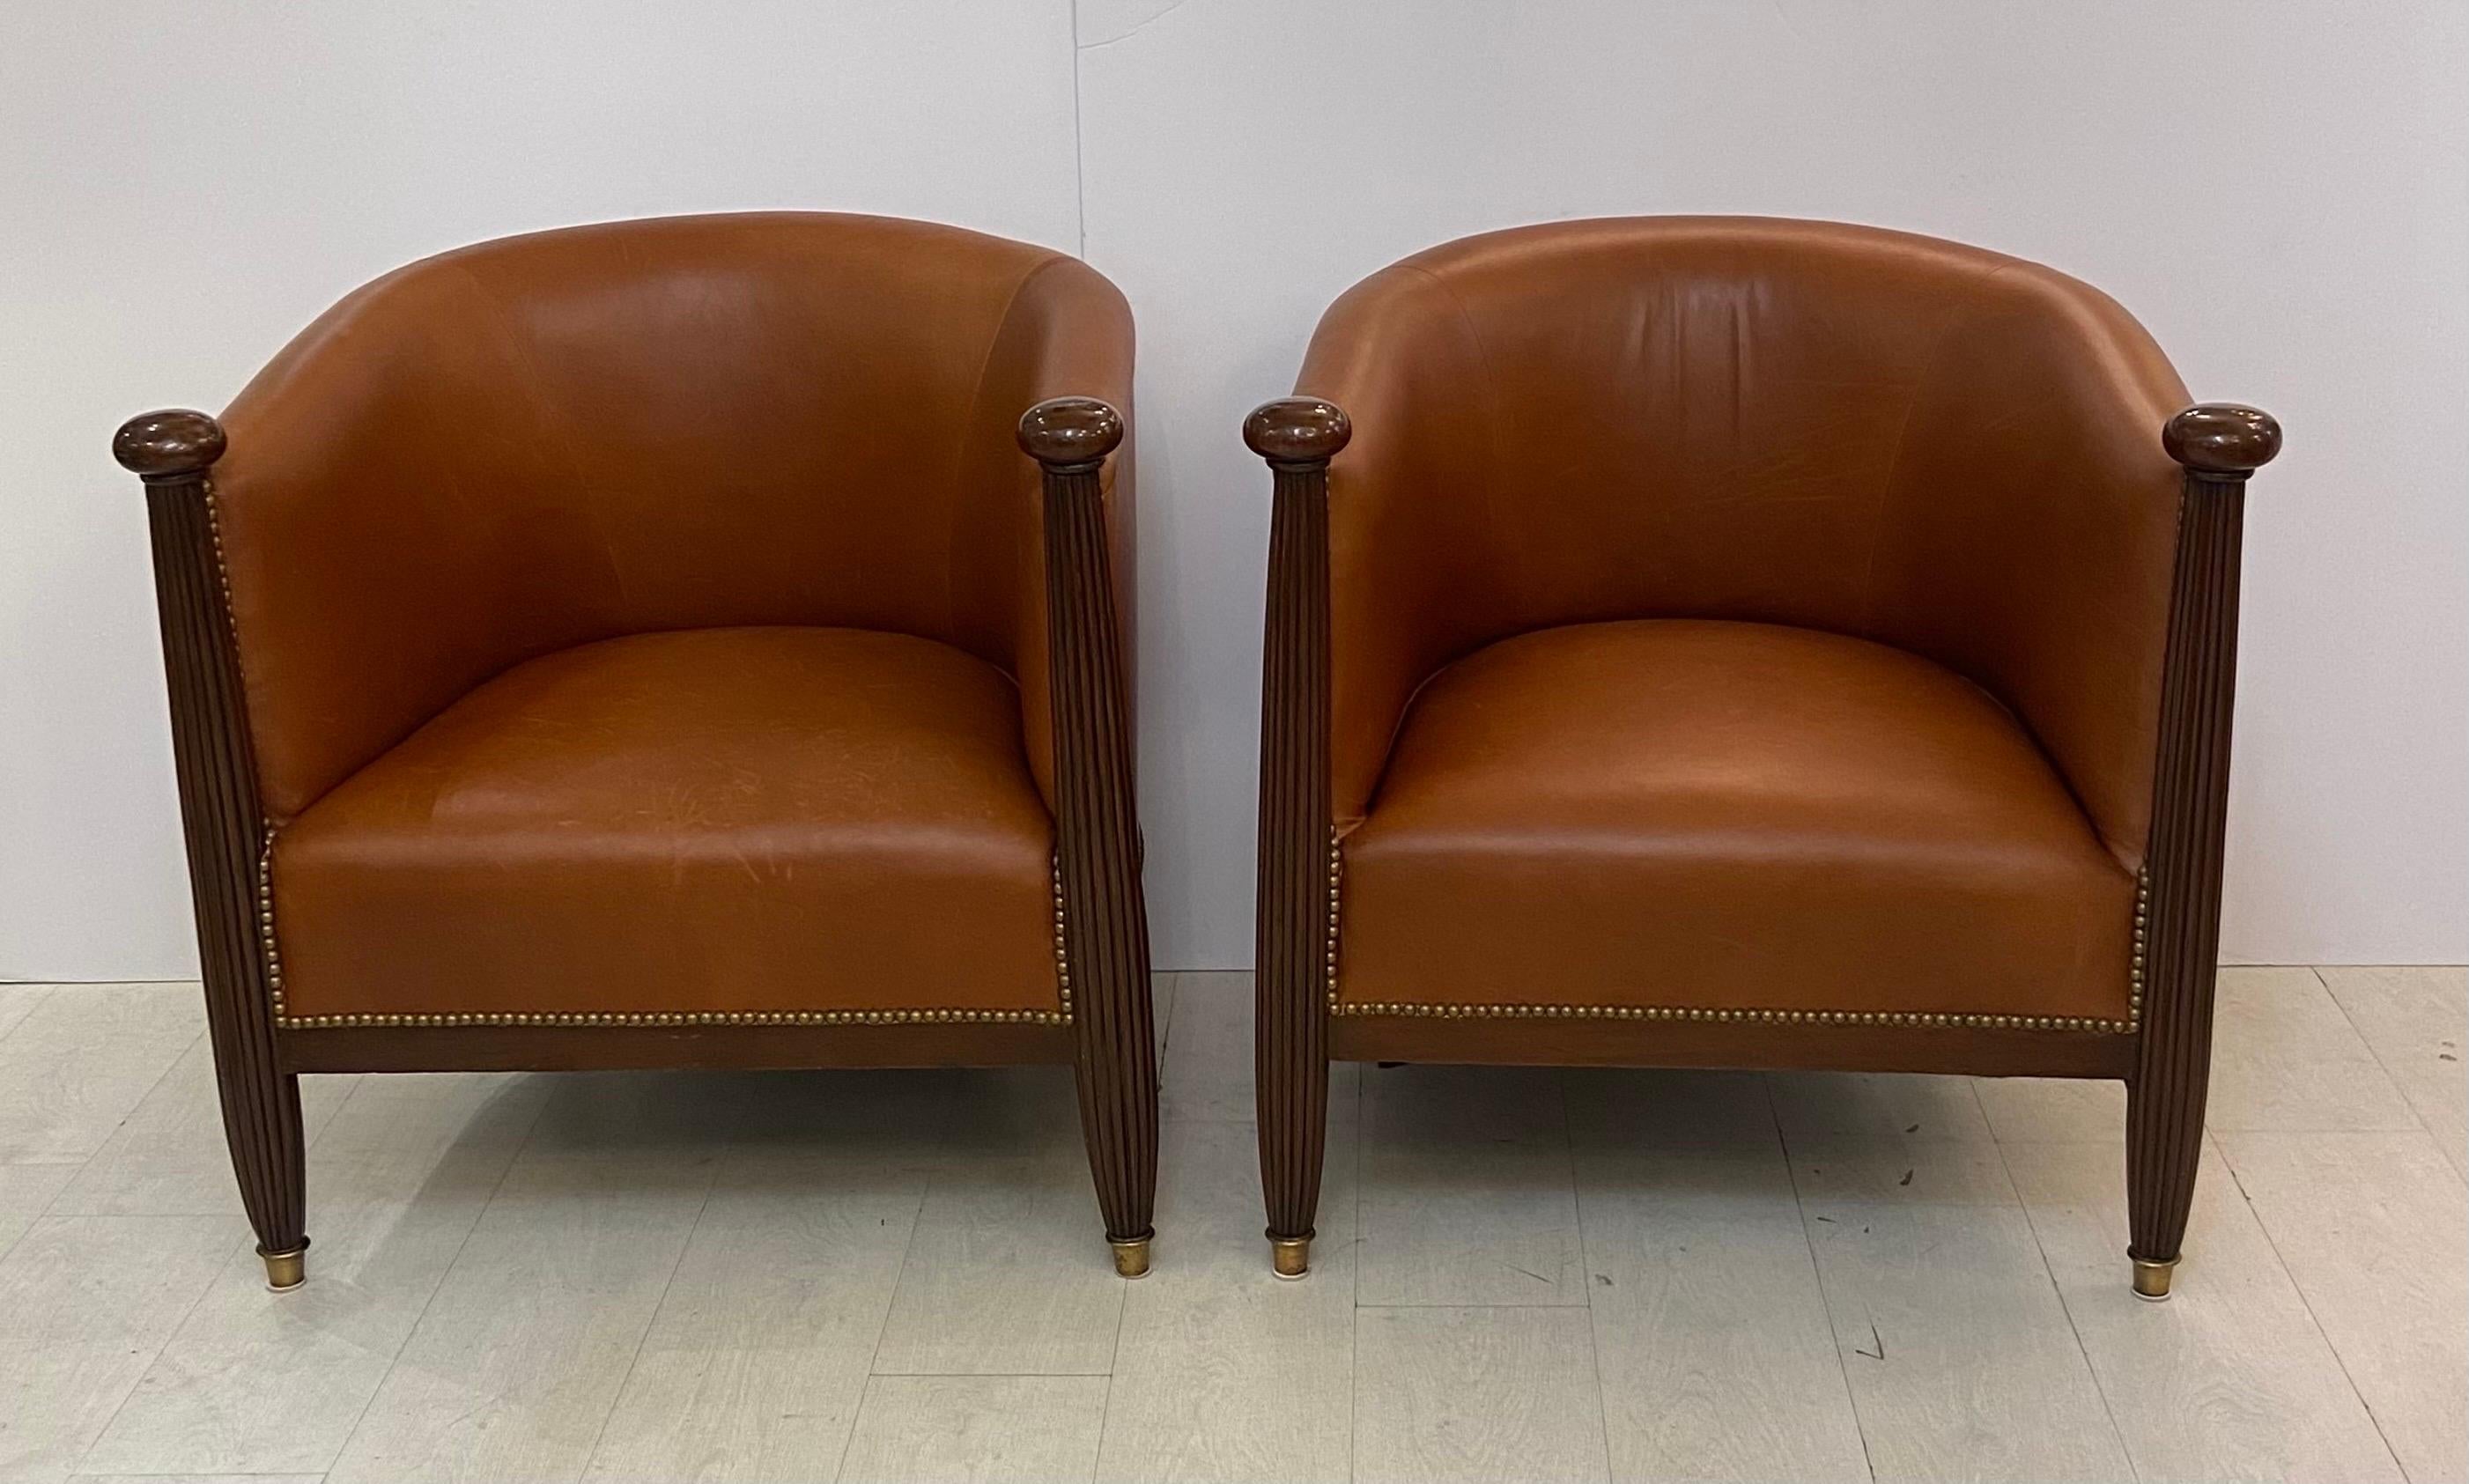 A very fine pair of period French Art Deco chairs with wonderfully carved front rails that extend upward to large mahogany hand grips. The Hand carved reeded mahogany is finally detailed and continues down to the floor and Terminates in brass caps,